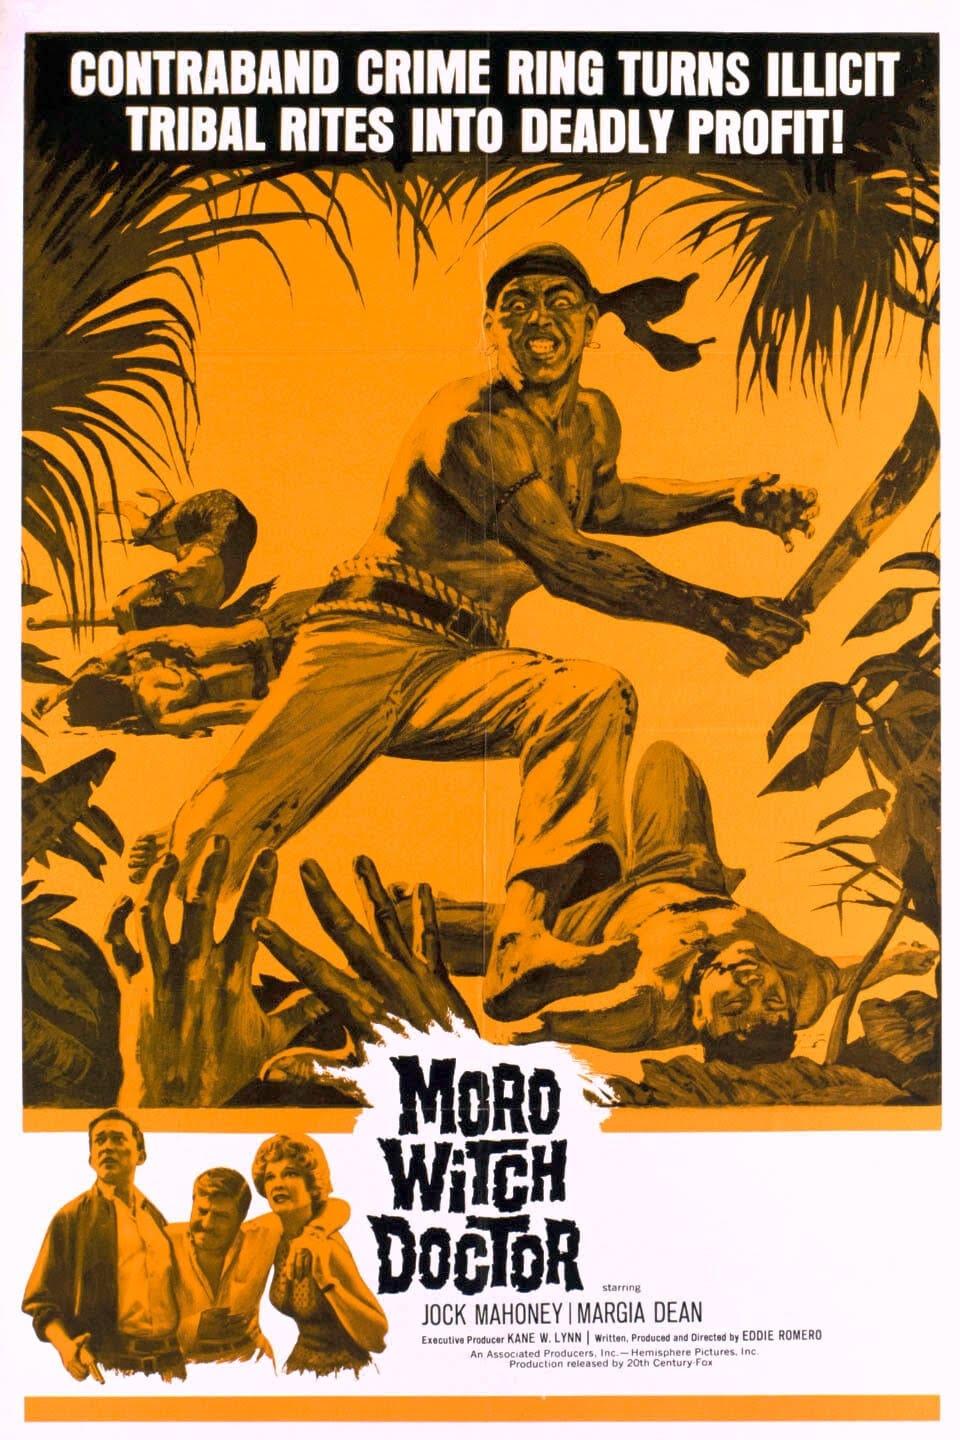 Moro Witch Doctor poster